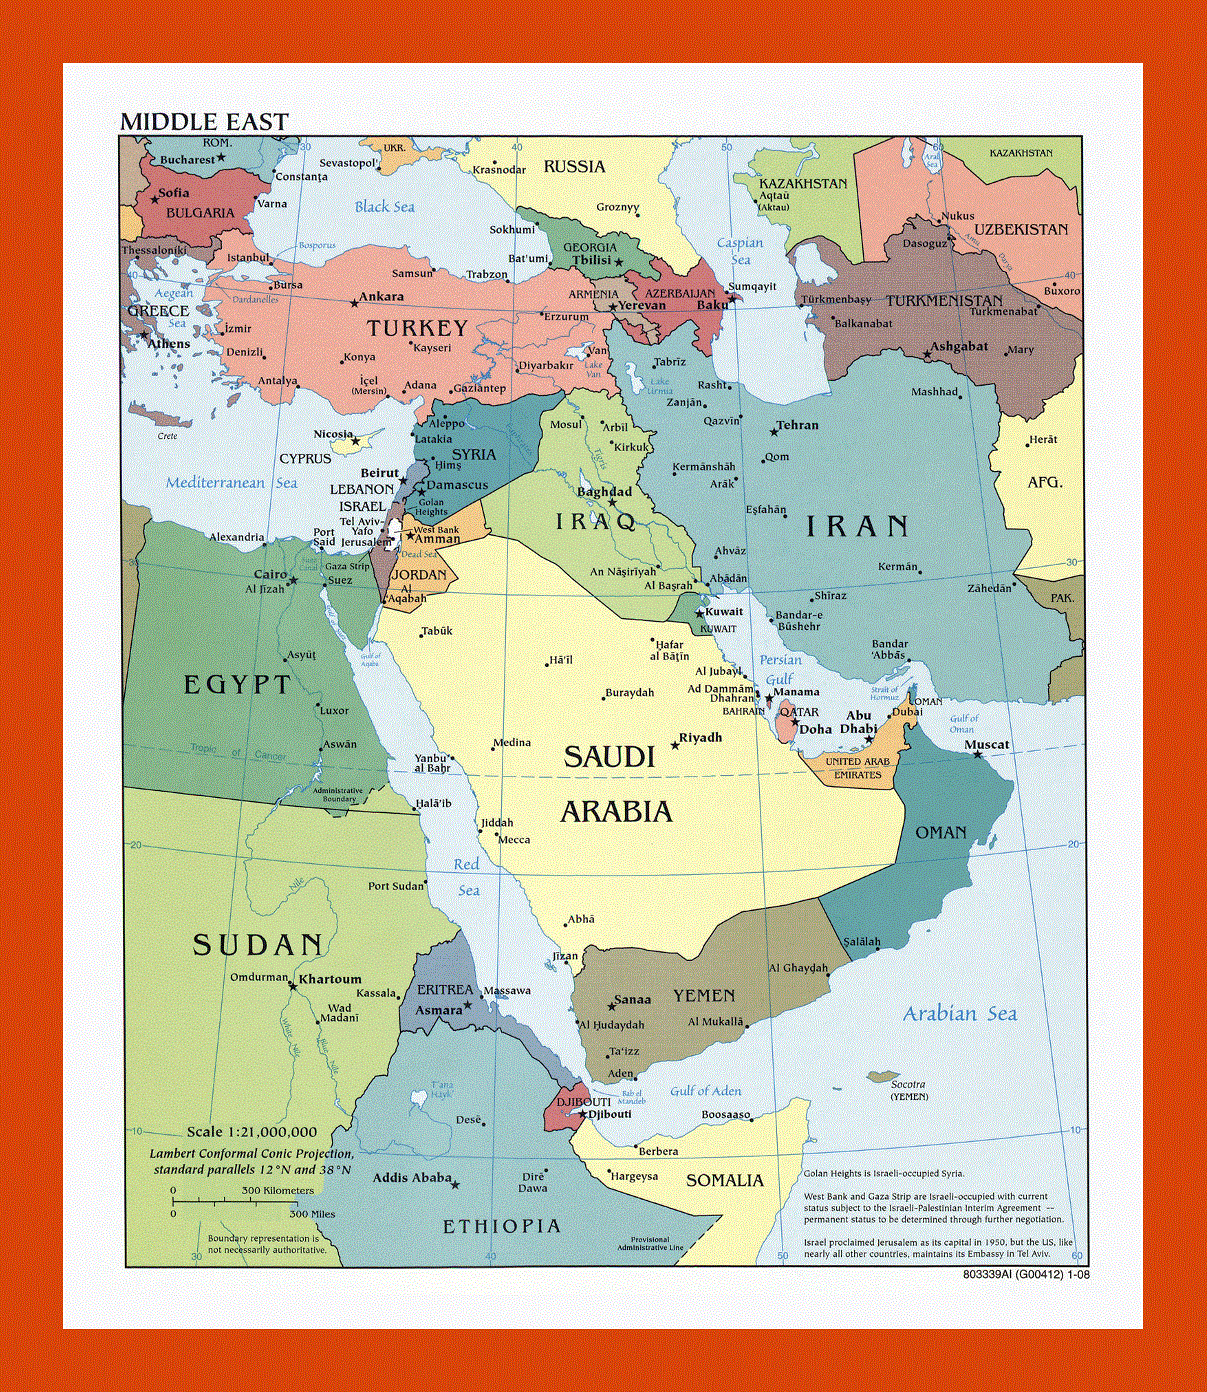 Political map of the Middle East - 2008